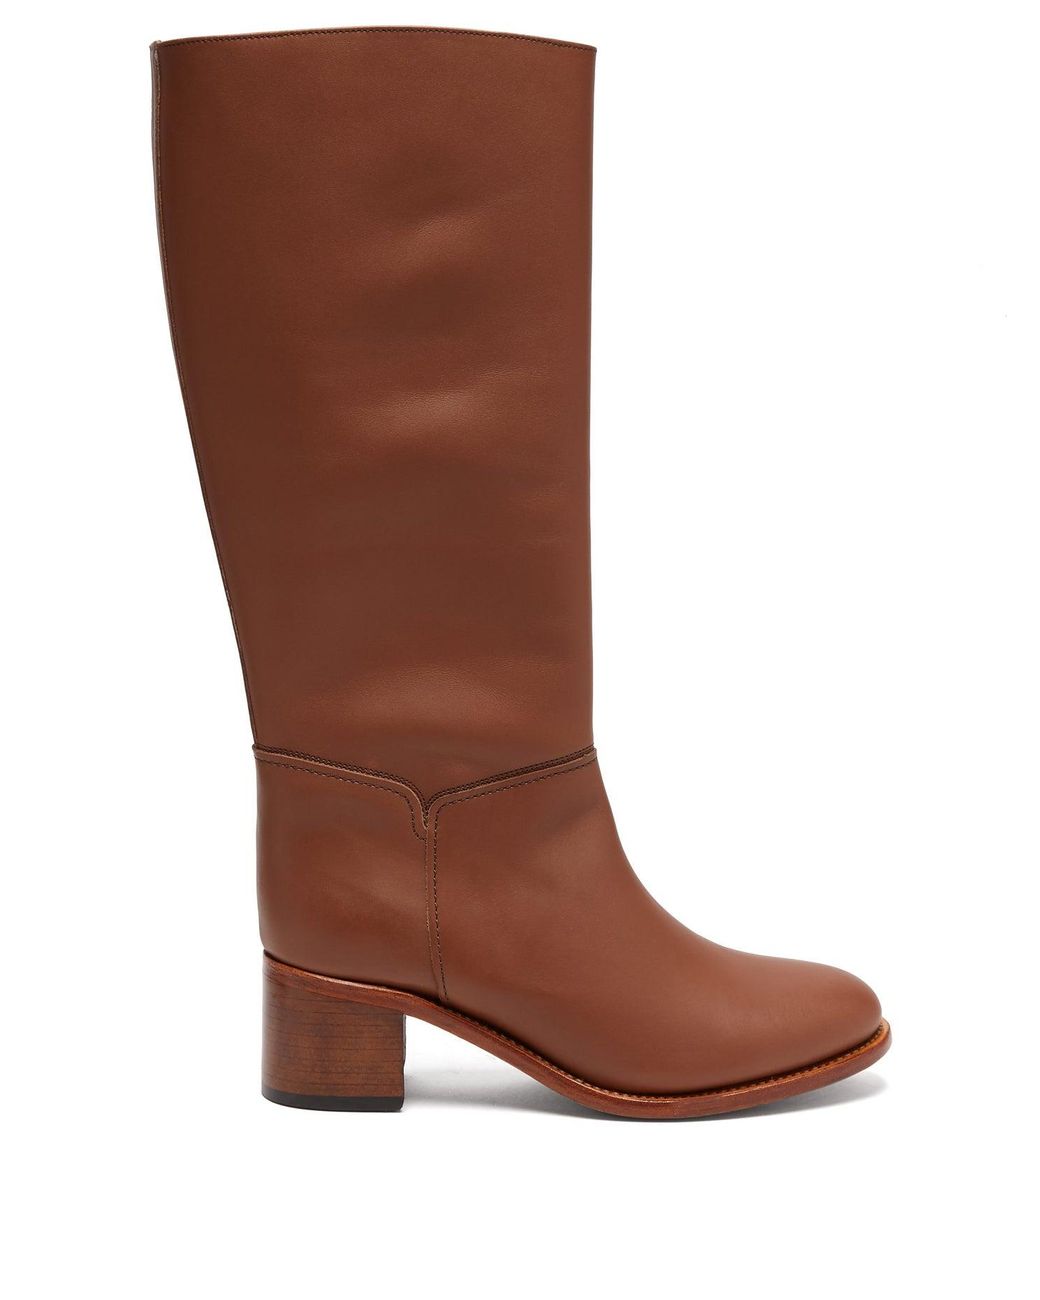 A.P.C. Iris Knee-high Leather Boots in Brown | Lyst